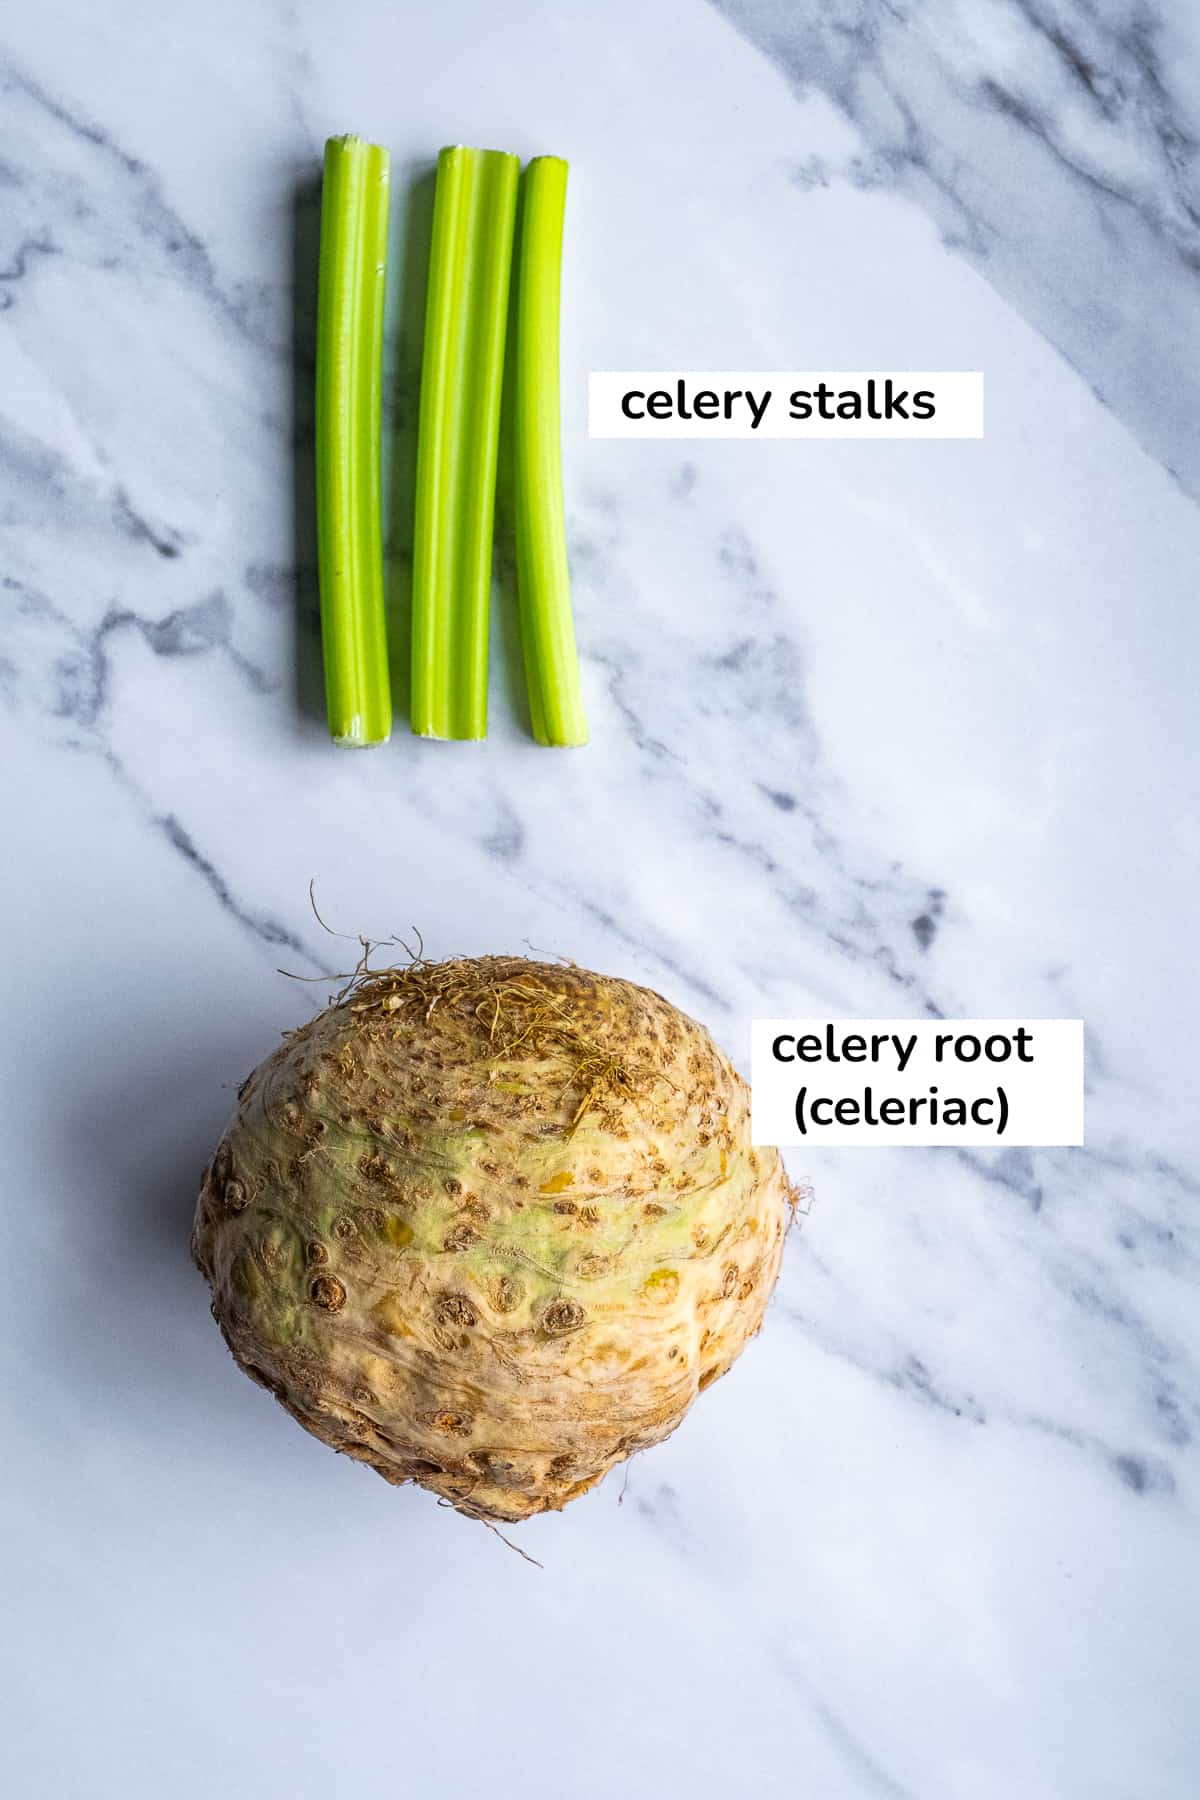 Celery stalks and celeriac photographed together on a white marble.